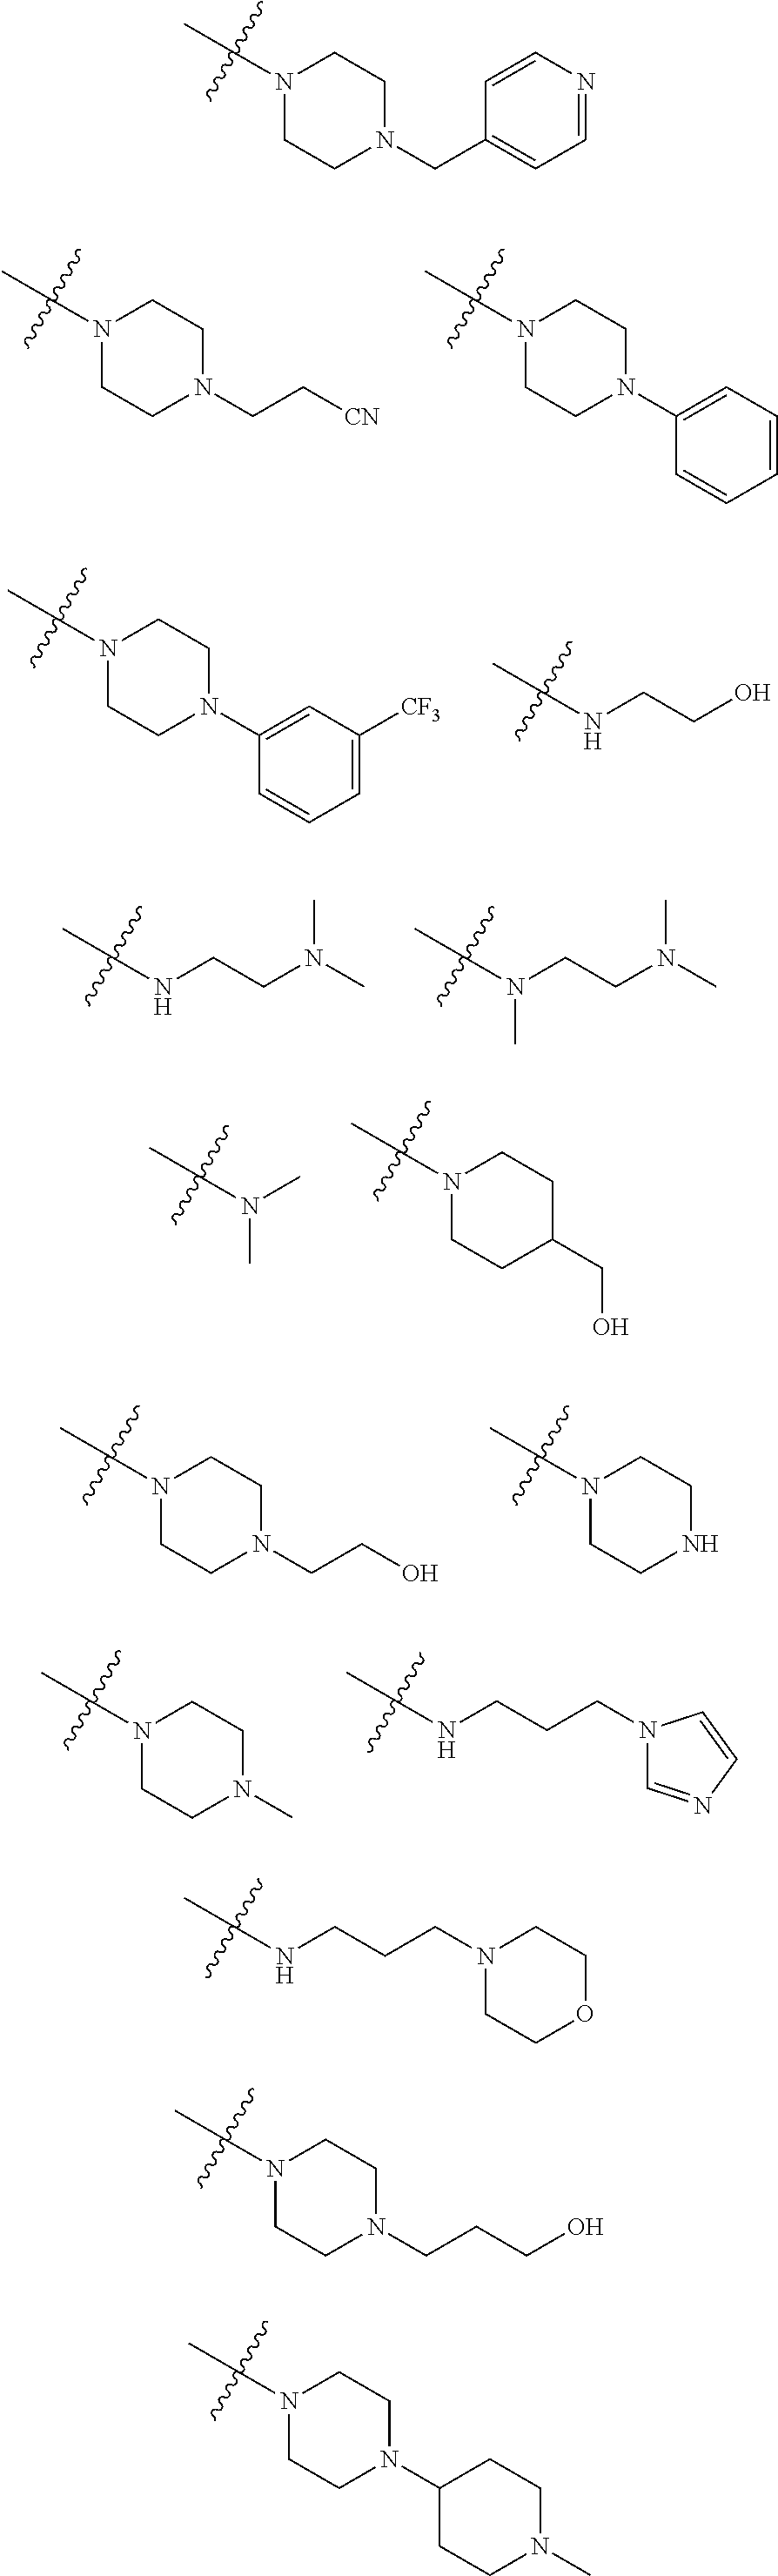 Ureidophenyl substituted triazine derivatives and their therapeutical applications